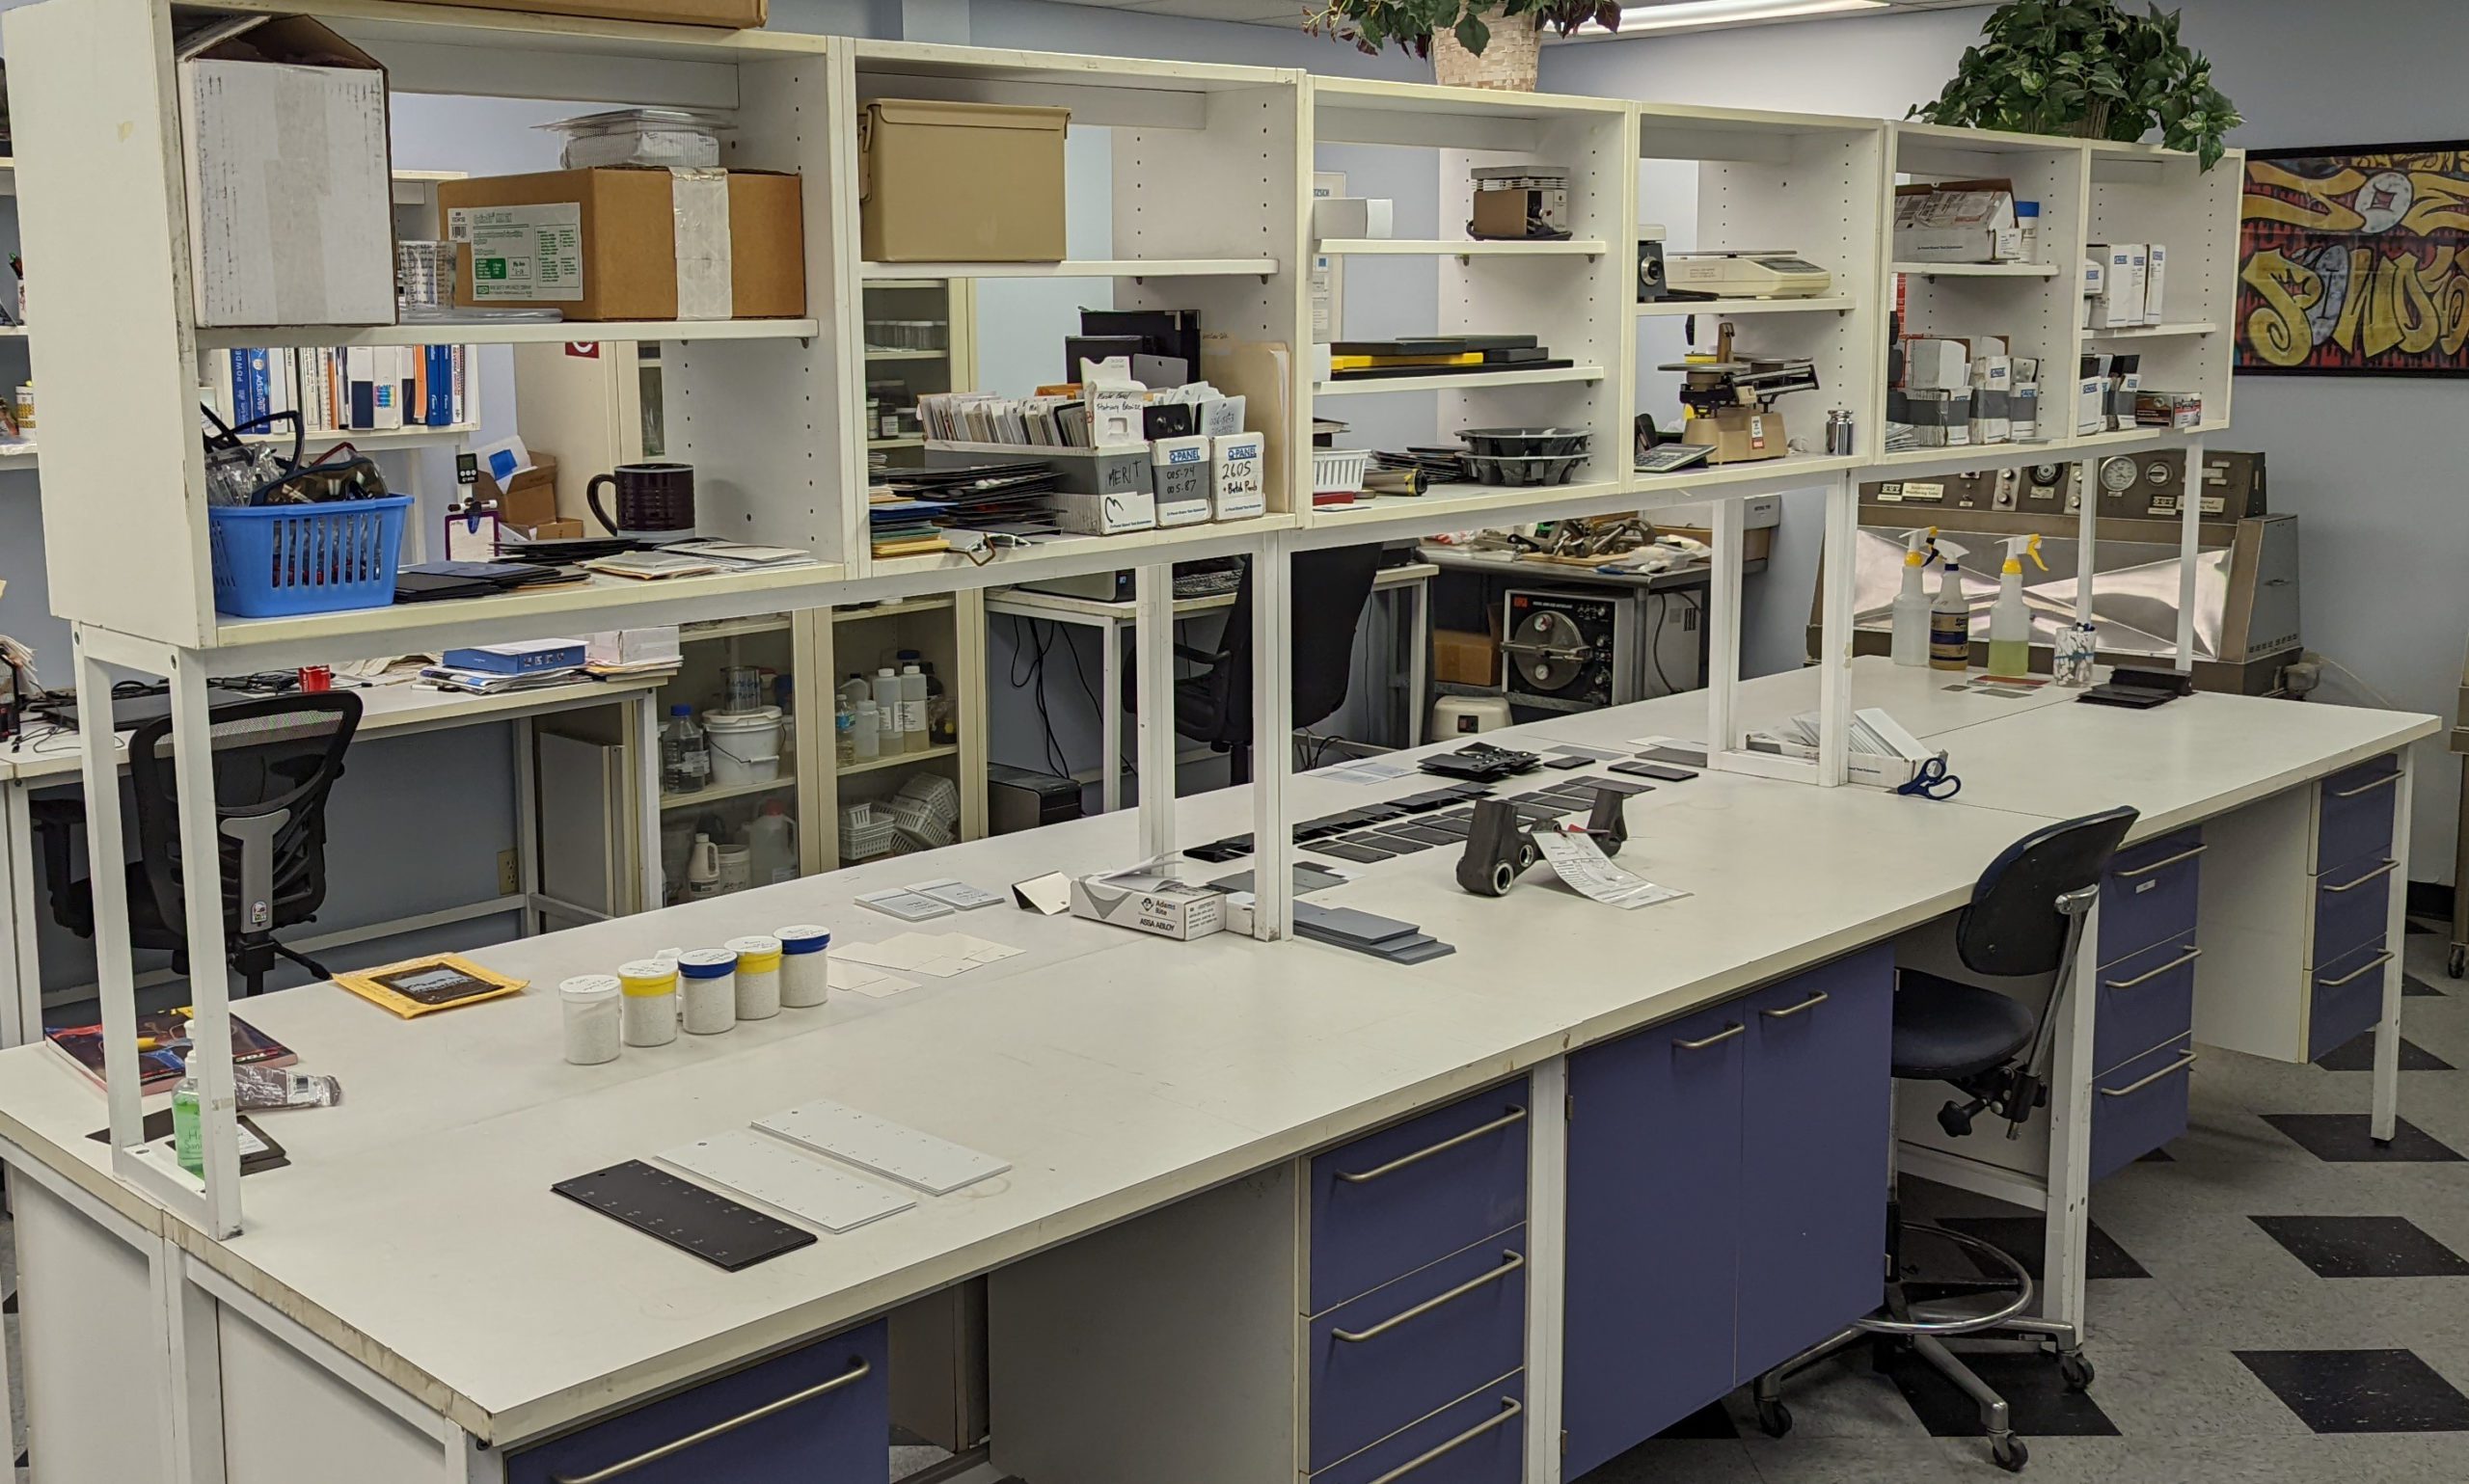 A view of part of the ChemQuest Powder Coating Research lab space